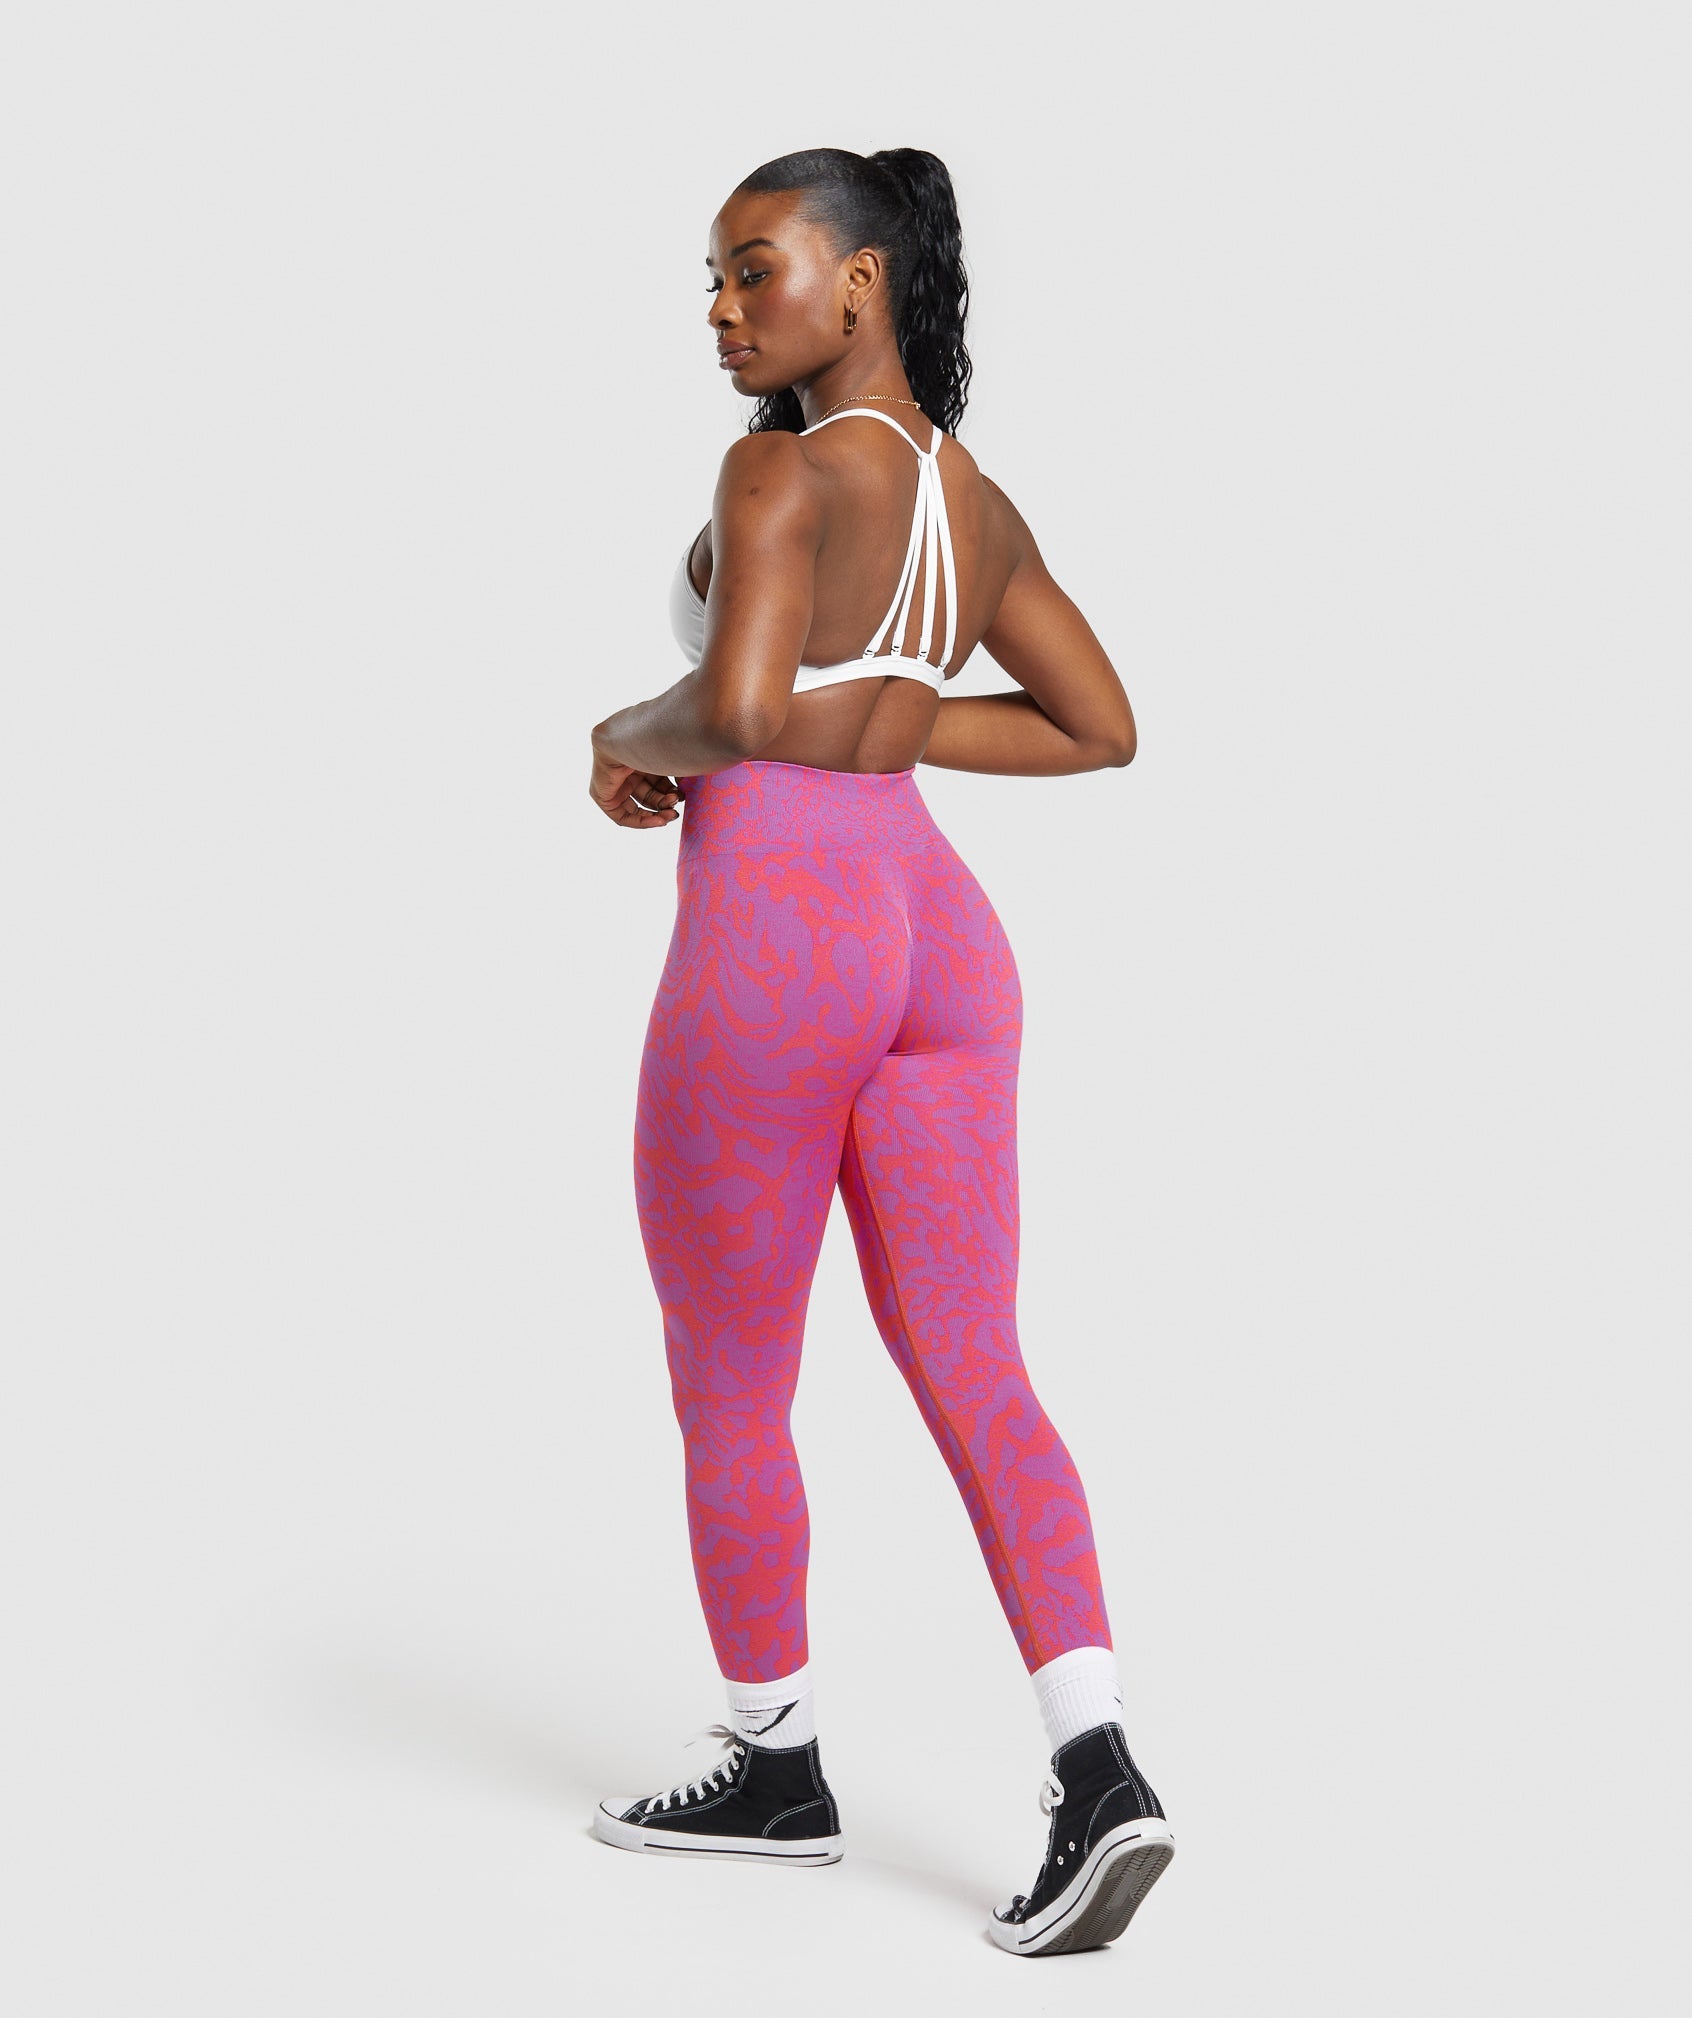 Adapt Safari Seamless Leggings in Shelly Pink/Fly Coral - view 4